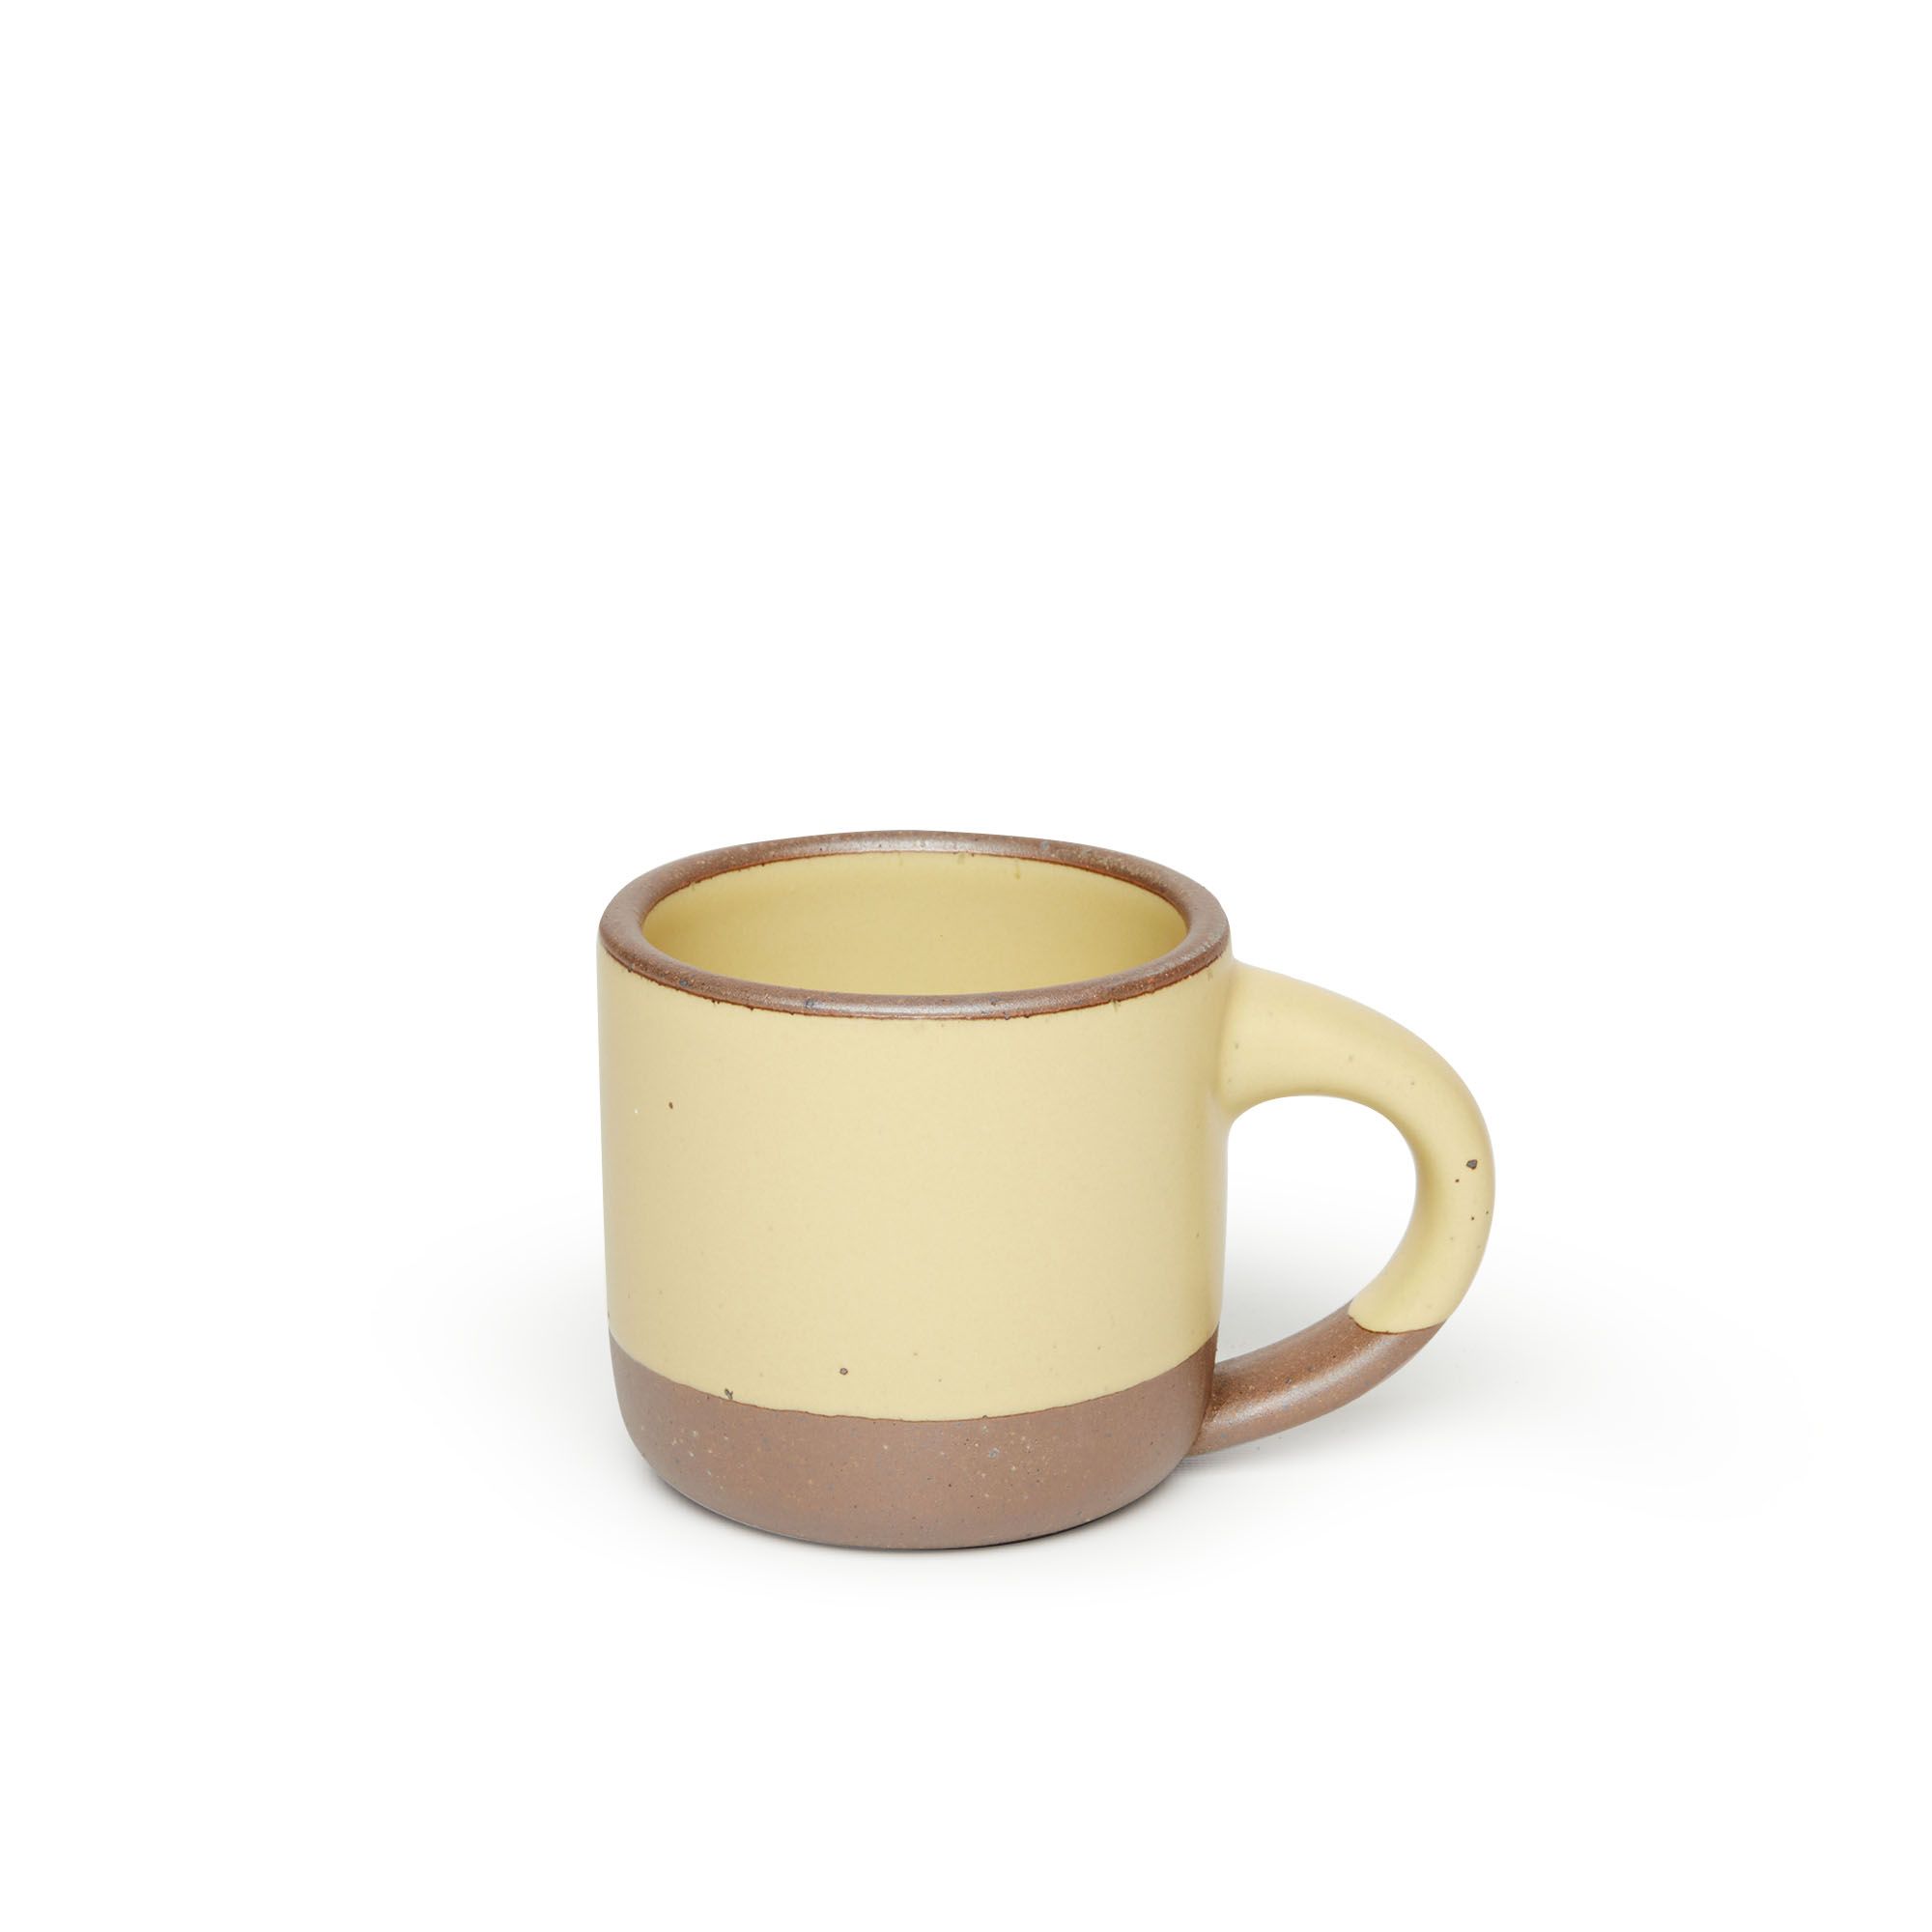 A small sized ceramic mug with handle in a light butter yellow glaze featuring iron speckles and unglazed rim and bottom base.